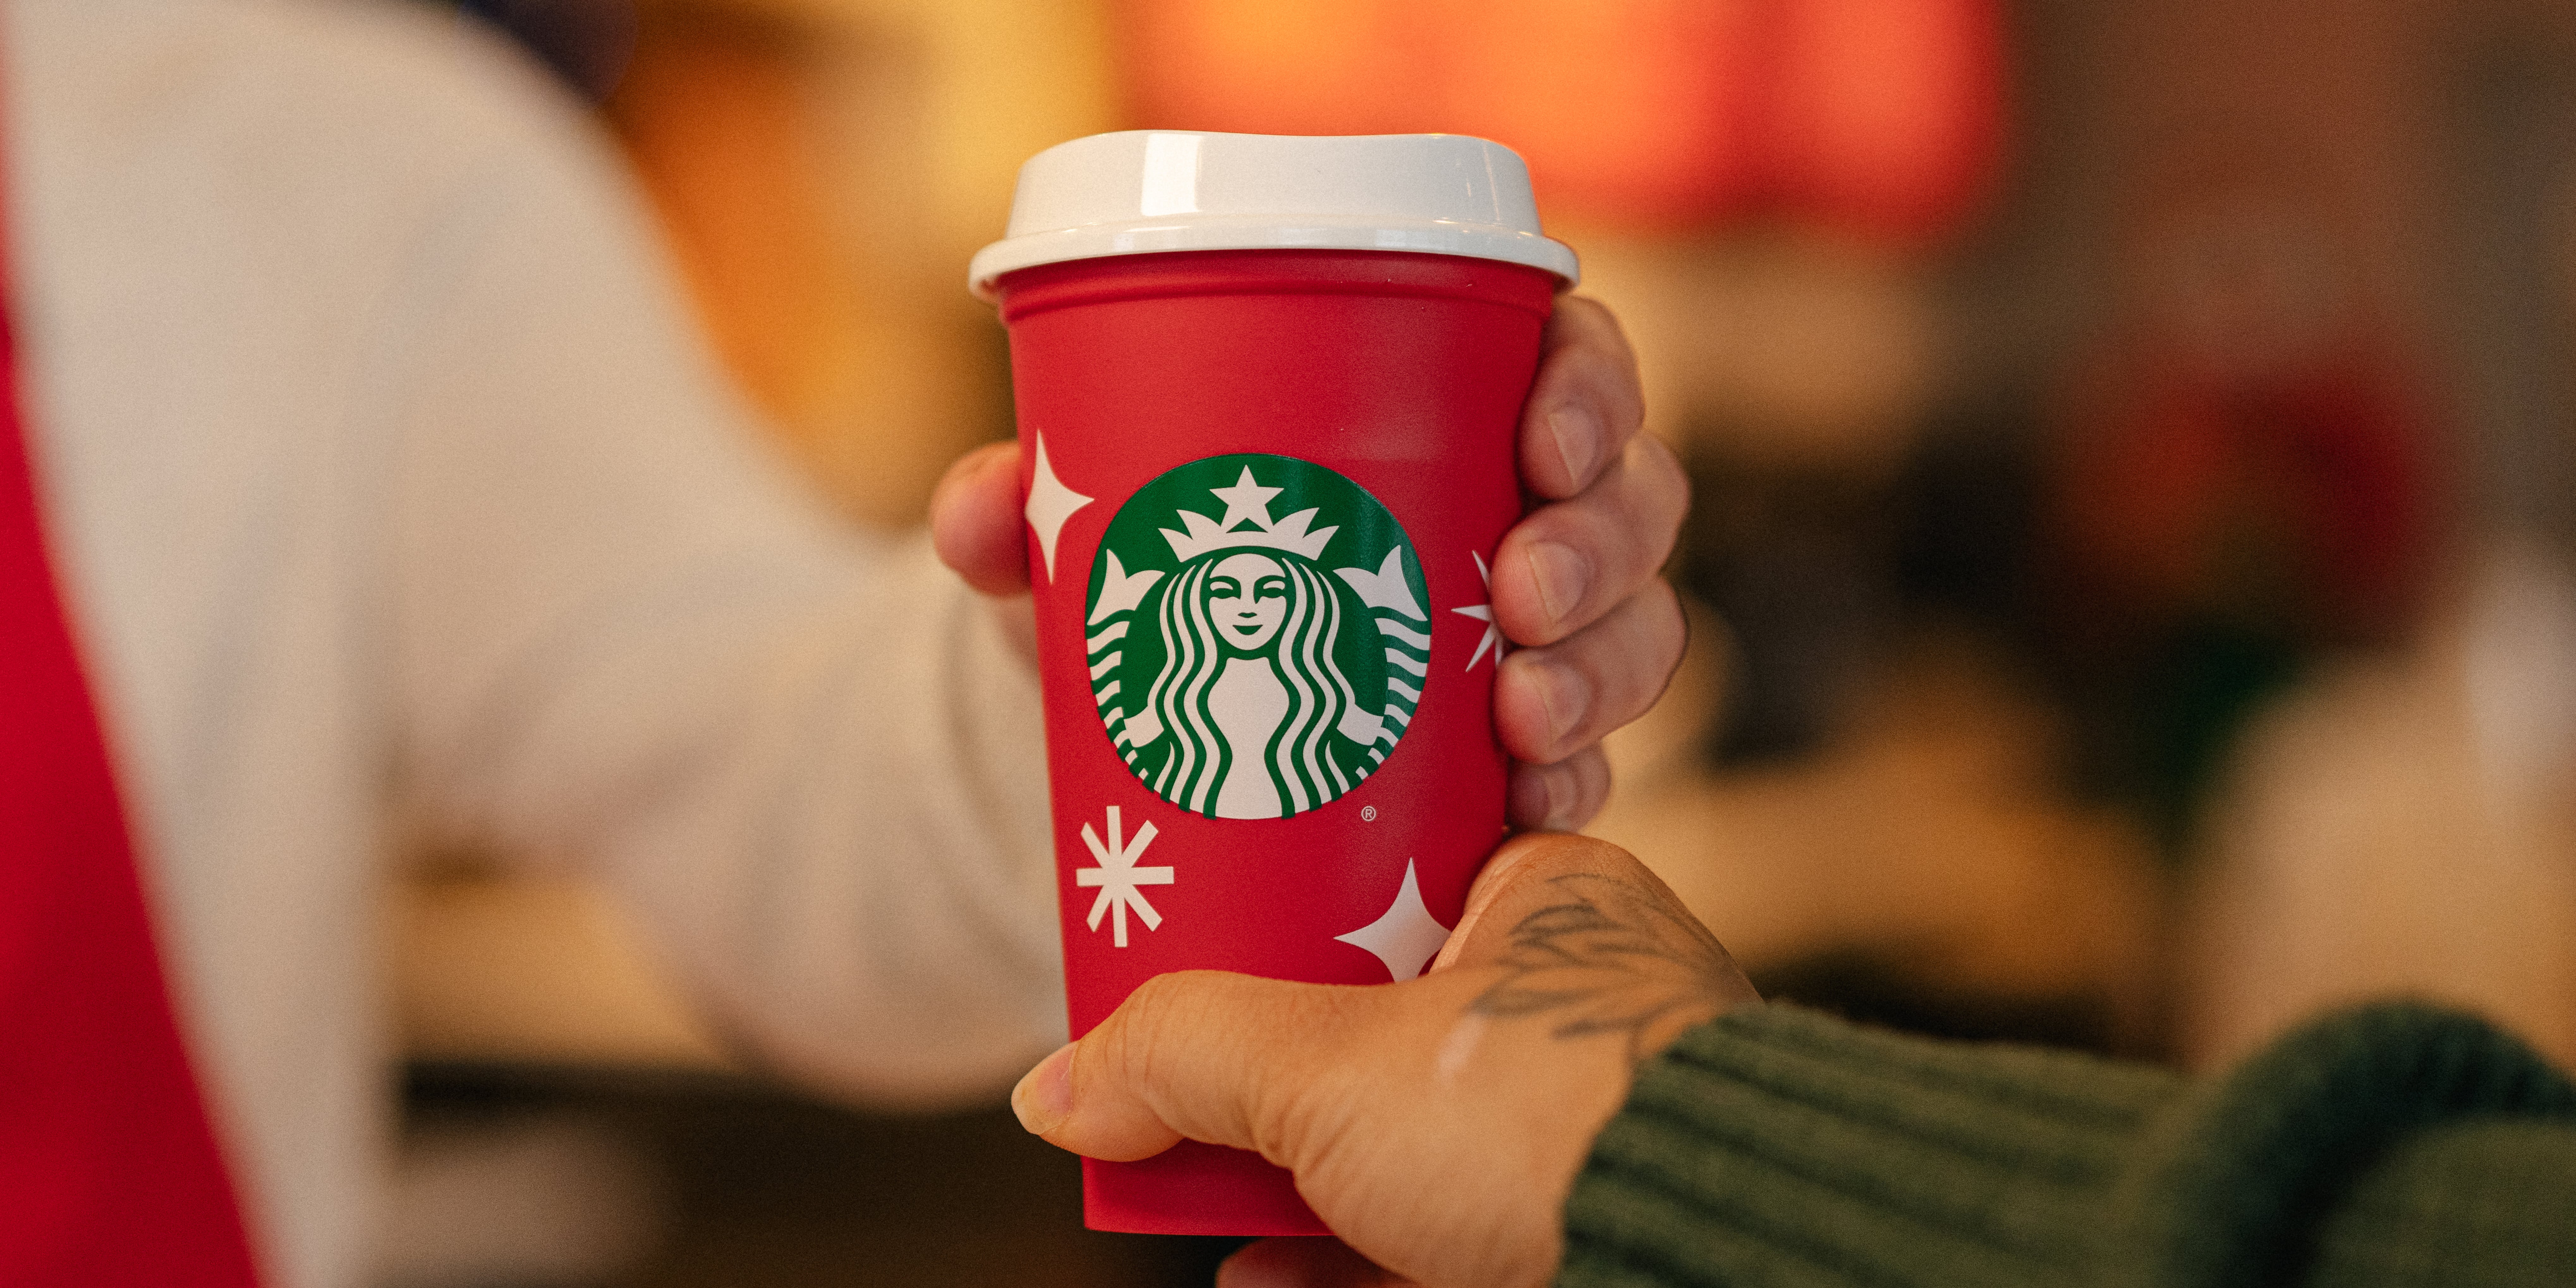 How to get your free 2021 reusable red holiday cup at Starbucks on